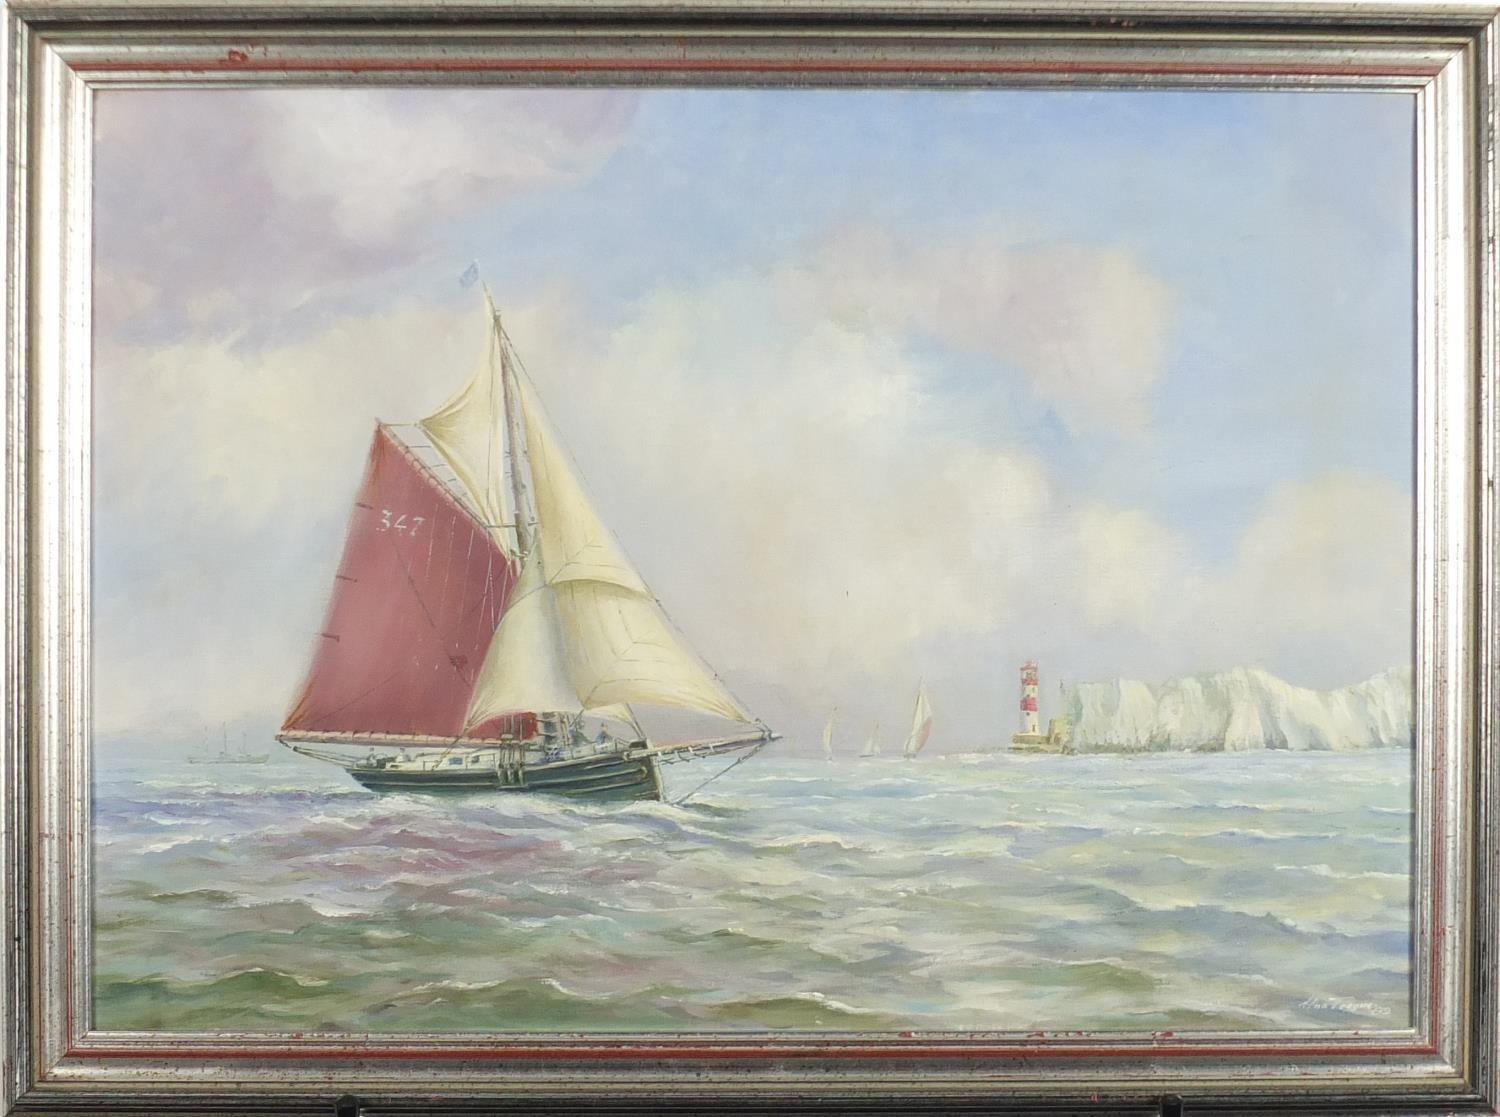 Monteague - East Coast Old Gaffers and Theodora, pair of marine oil on canvases, framed, each 49.5cm - Image 8 of 11